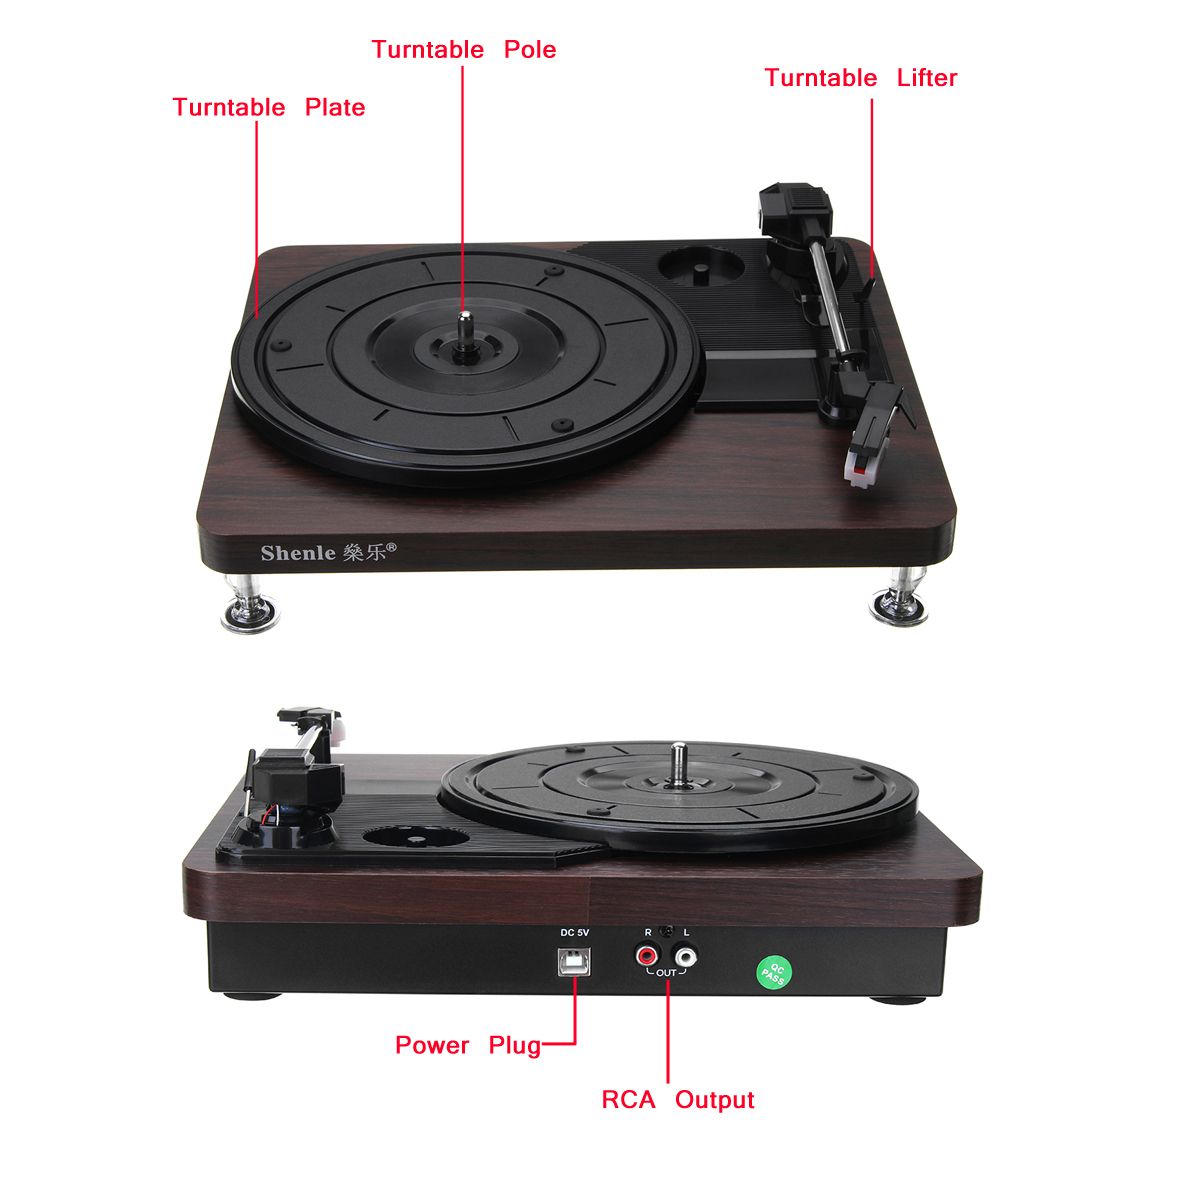 Shenle-33RPM-Antique-Gramophone-Turntable-Disc-Vinyl-Wood-Record-Player-RCA-RL-35mm-Output-USB-1310508